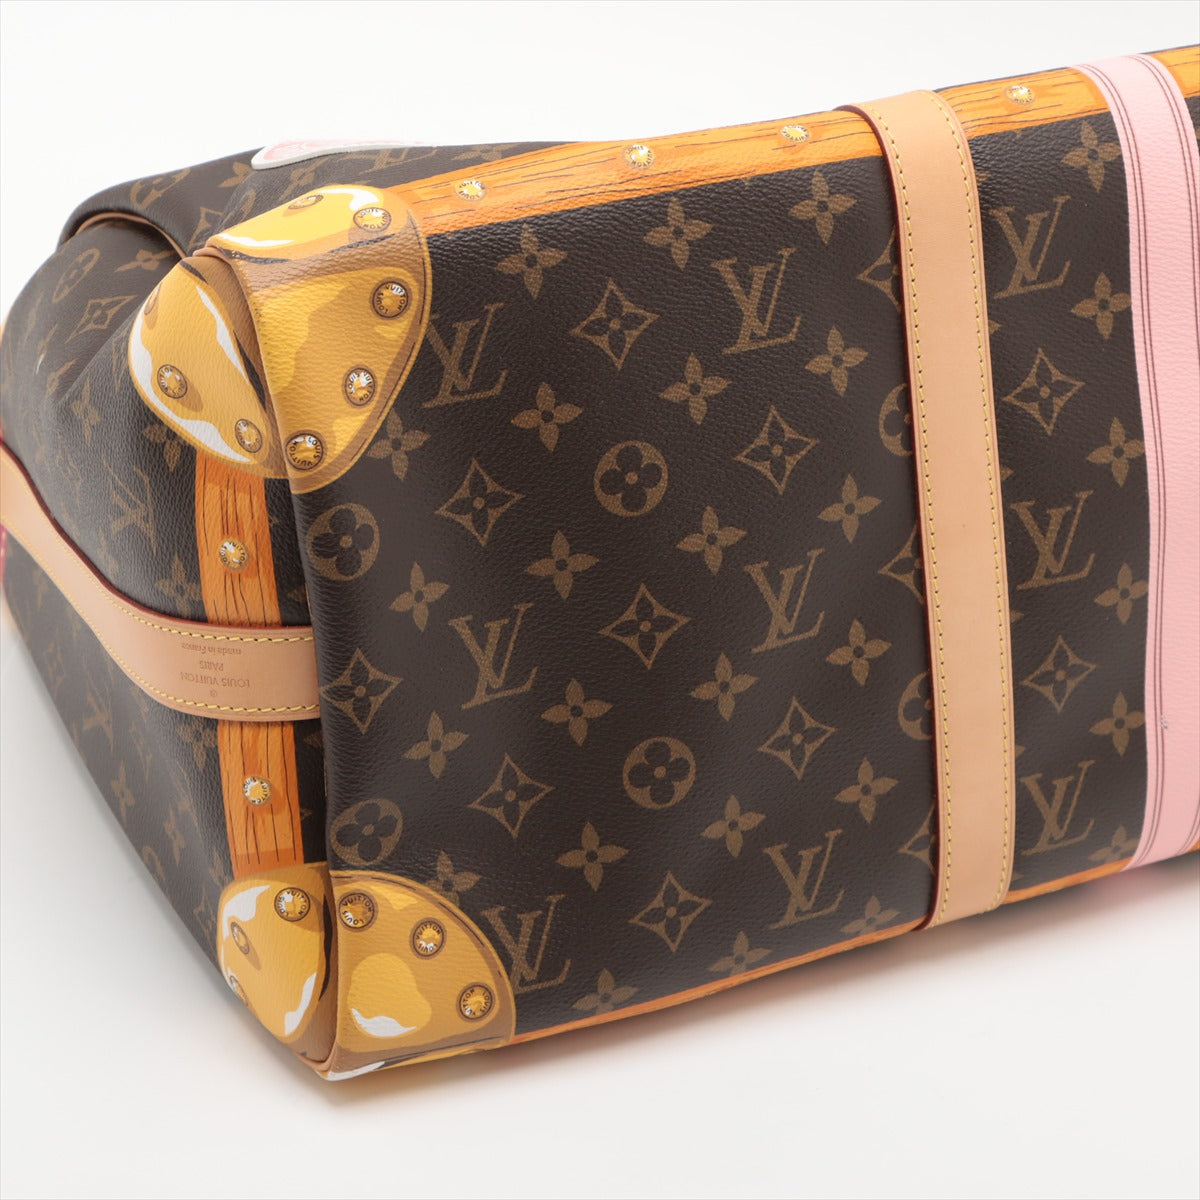 Louis Vuitton Monogram Summer Trunk Keepall Bandoulière 50 M43613 There is a name engraved